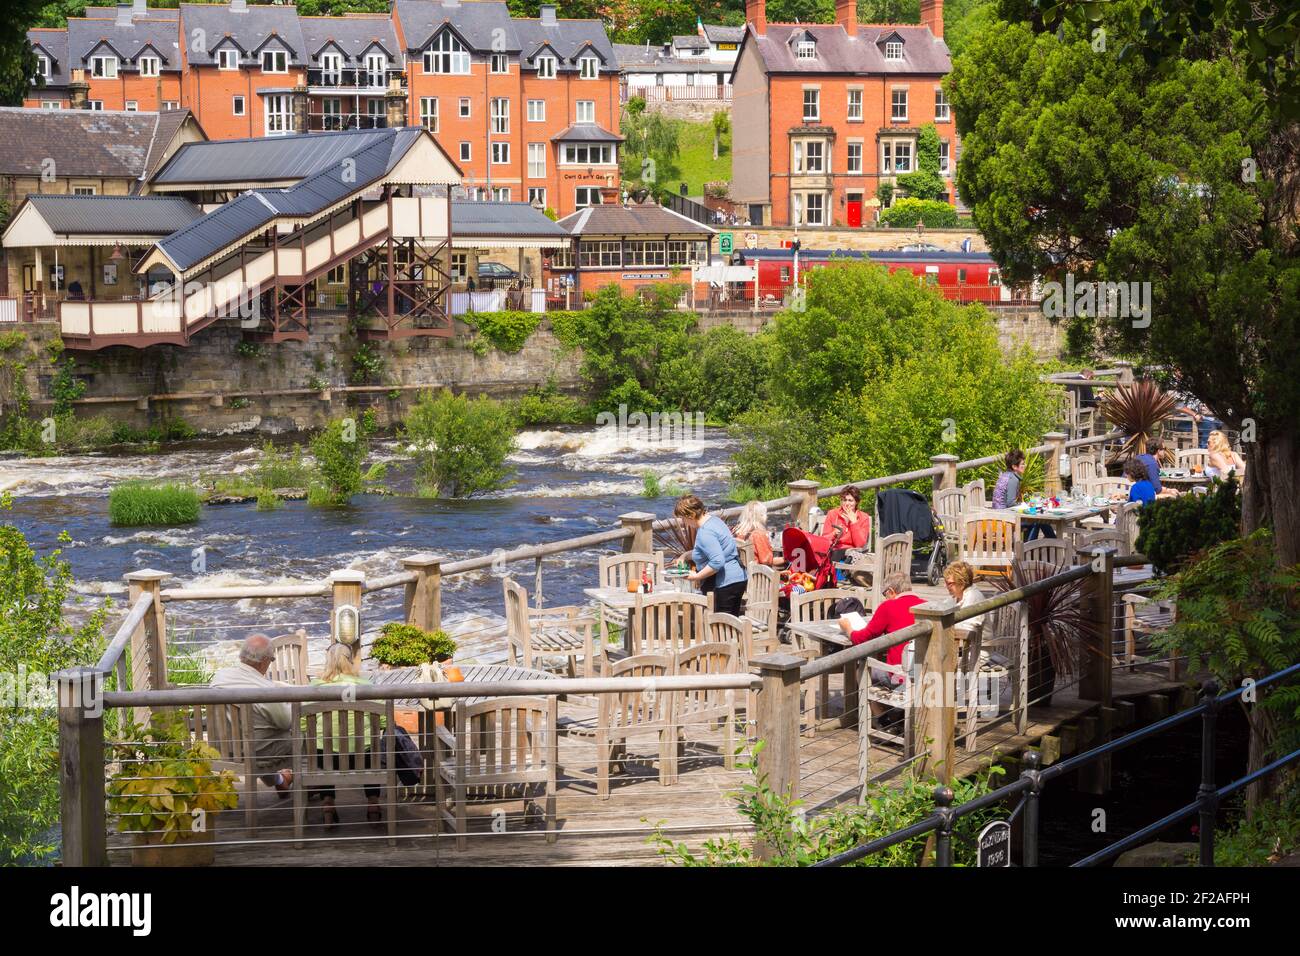 Open air decking and eating area at The Corn Mill a waterside pub and restaurant in Llangollen North Wales on the banks of the River Dee Stock Photo